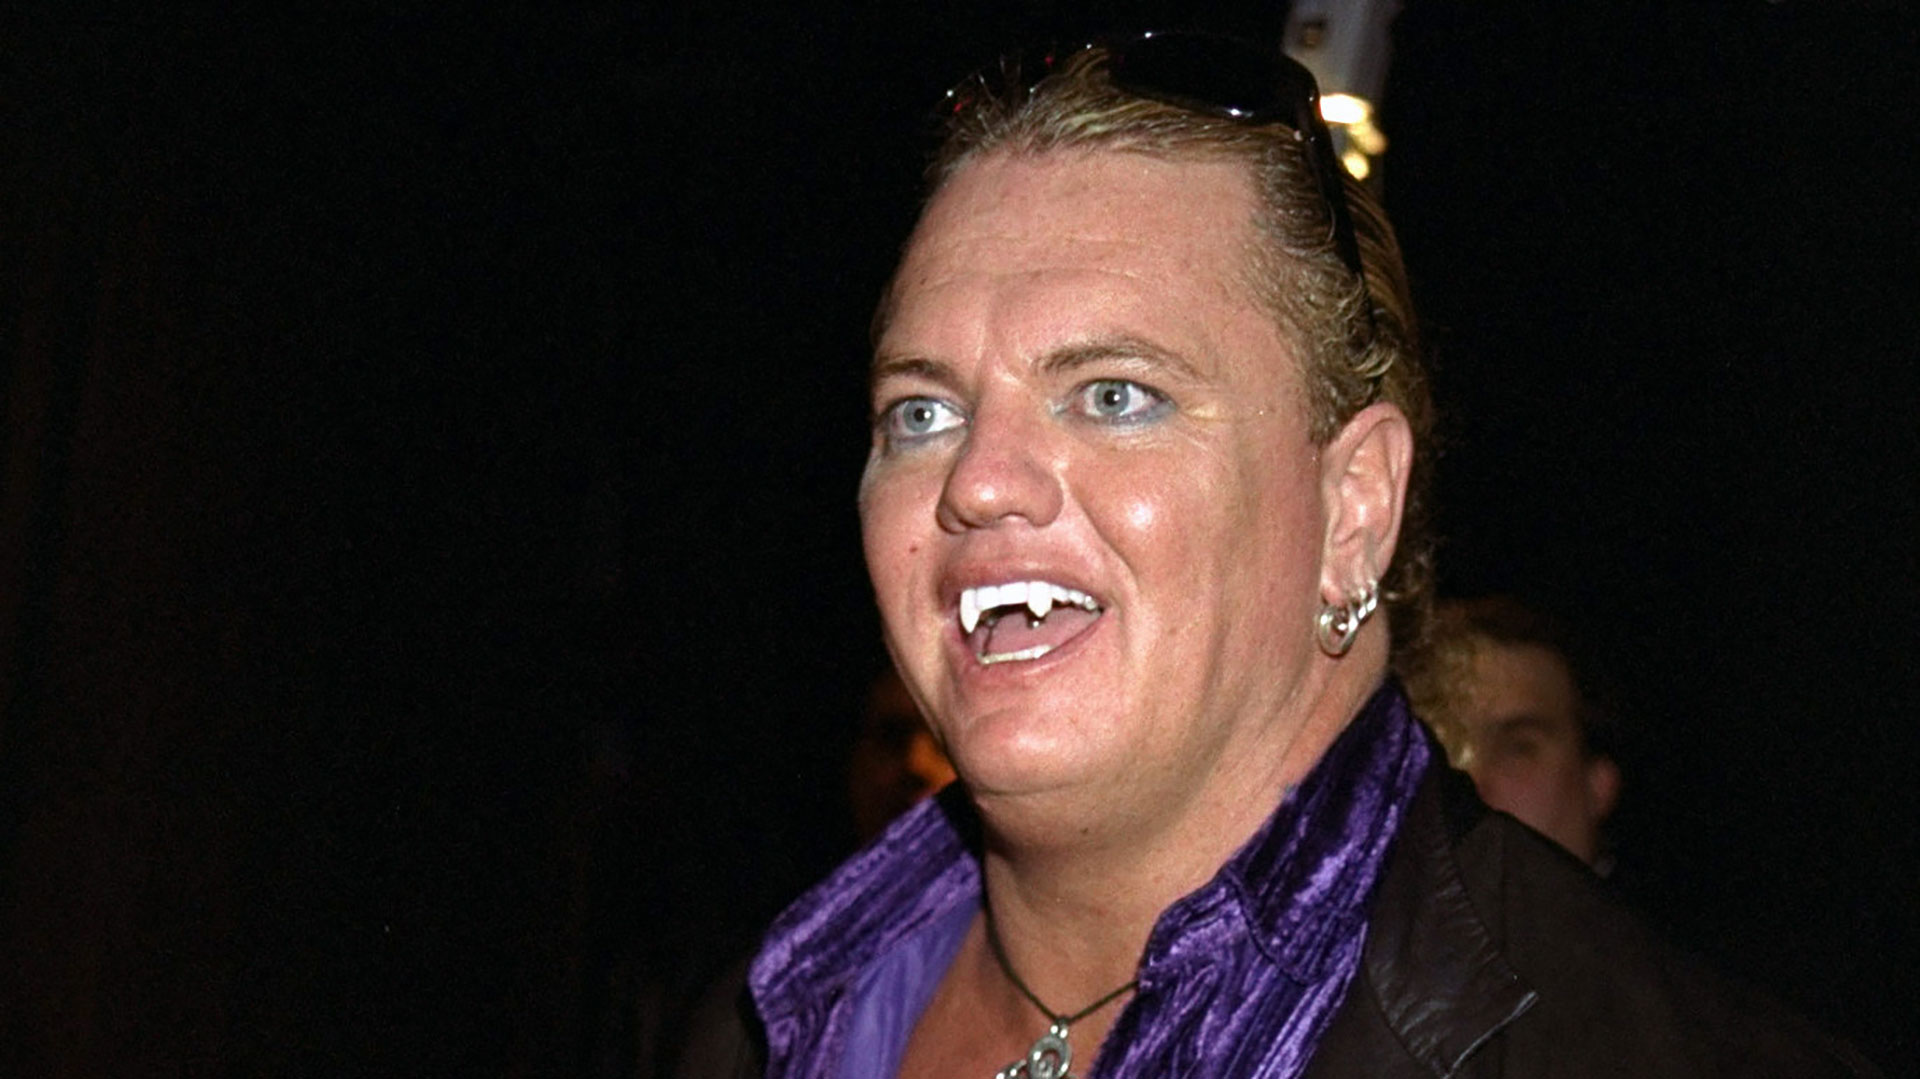 On today’s show: Dustin, Eric & Devin chop it up with WWE legend Gangrel ahead of his big appearance in Memphis on Sunday! Plus, they discuss the best wrestling they’ve watched all week.
